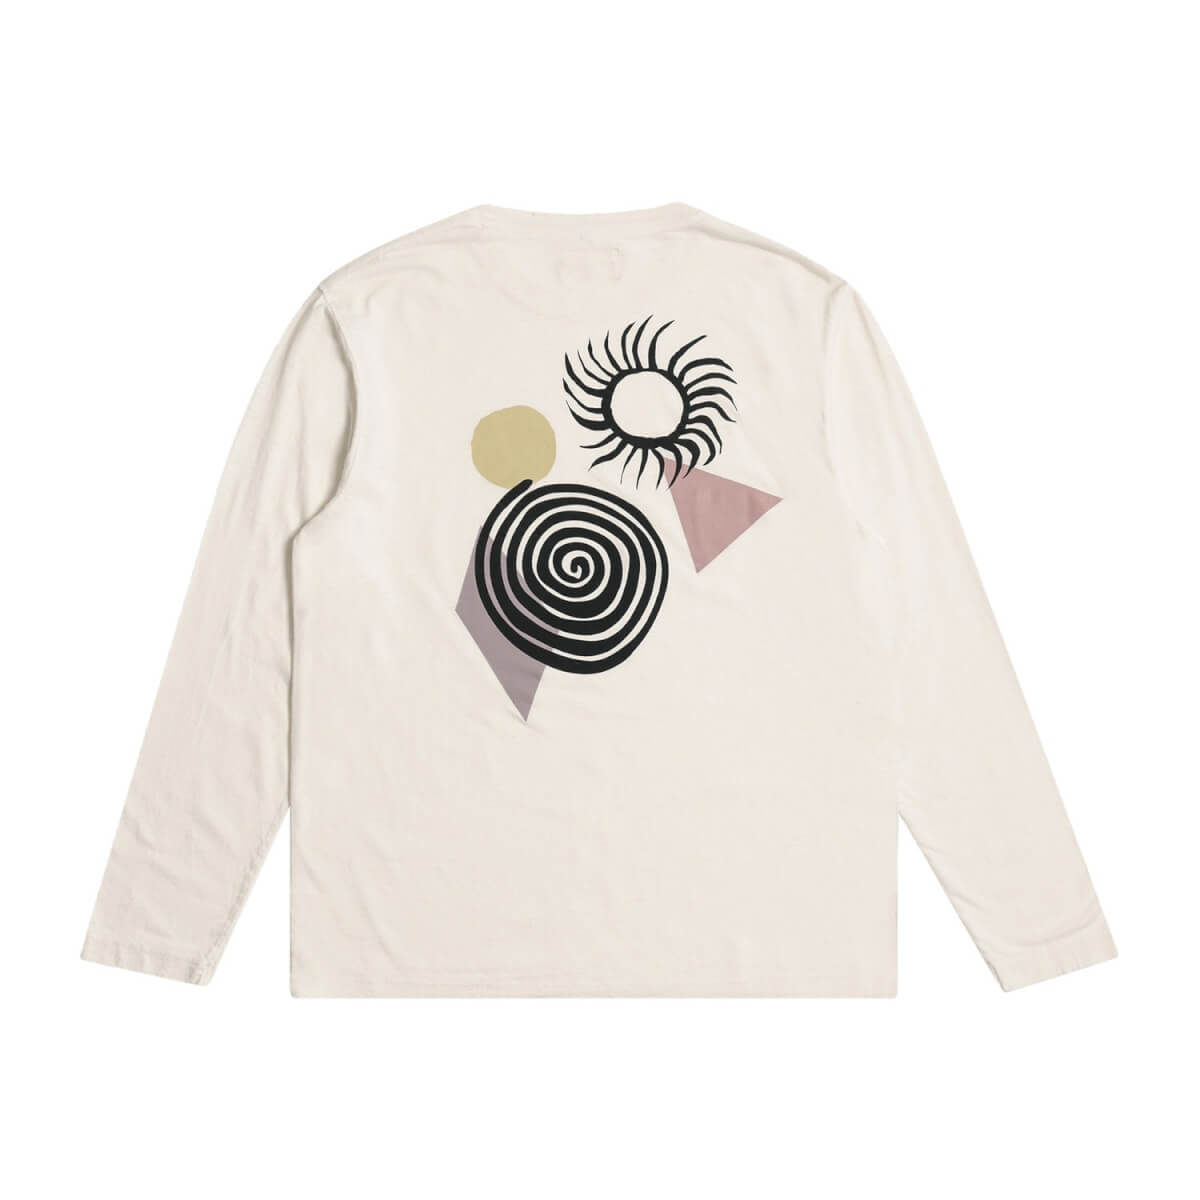 Men's Long Sleeve Crew Neck T Shirt - Graphic Print Shapes White Small Far Afield